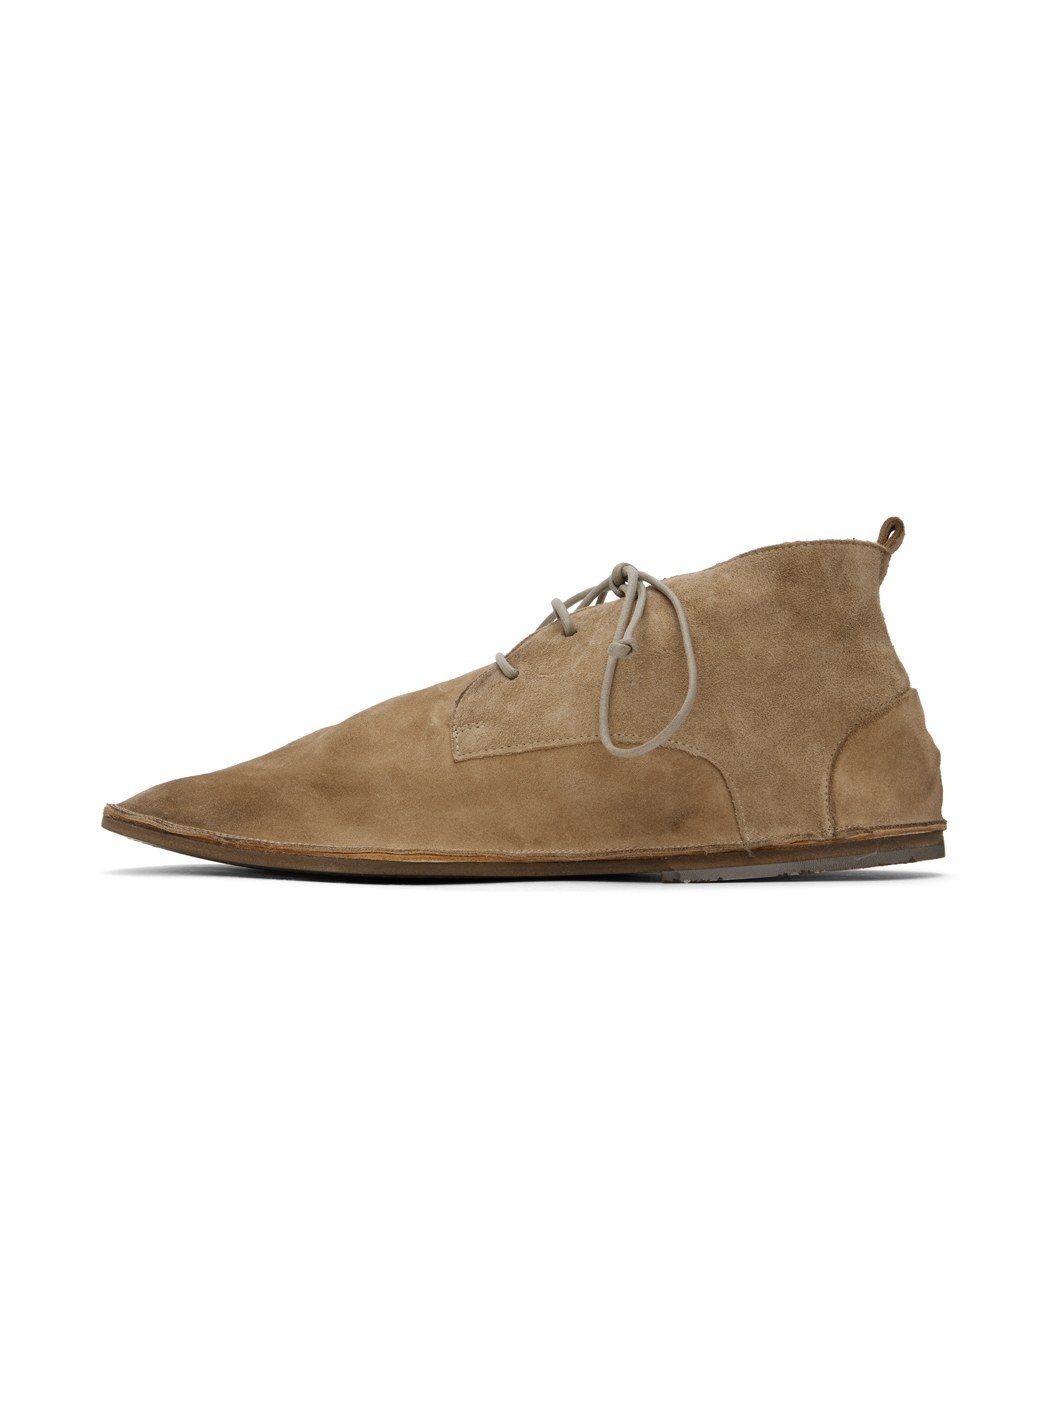 Taupe Strasacco Desert Boots - 3